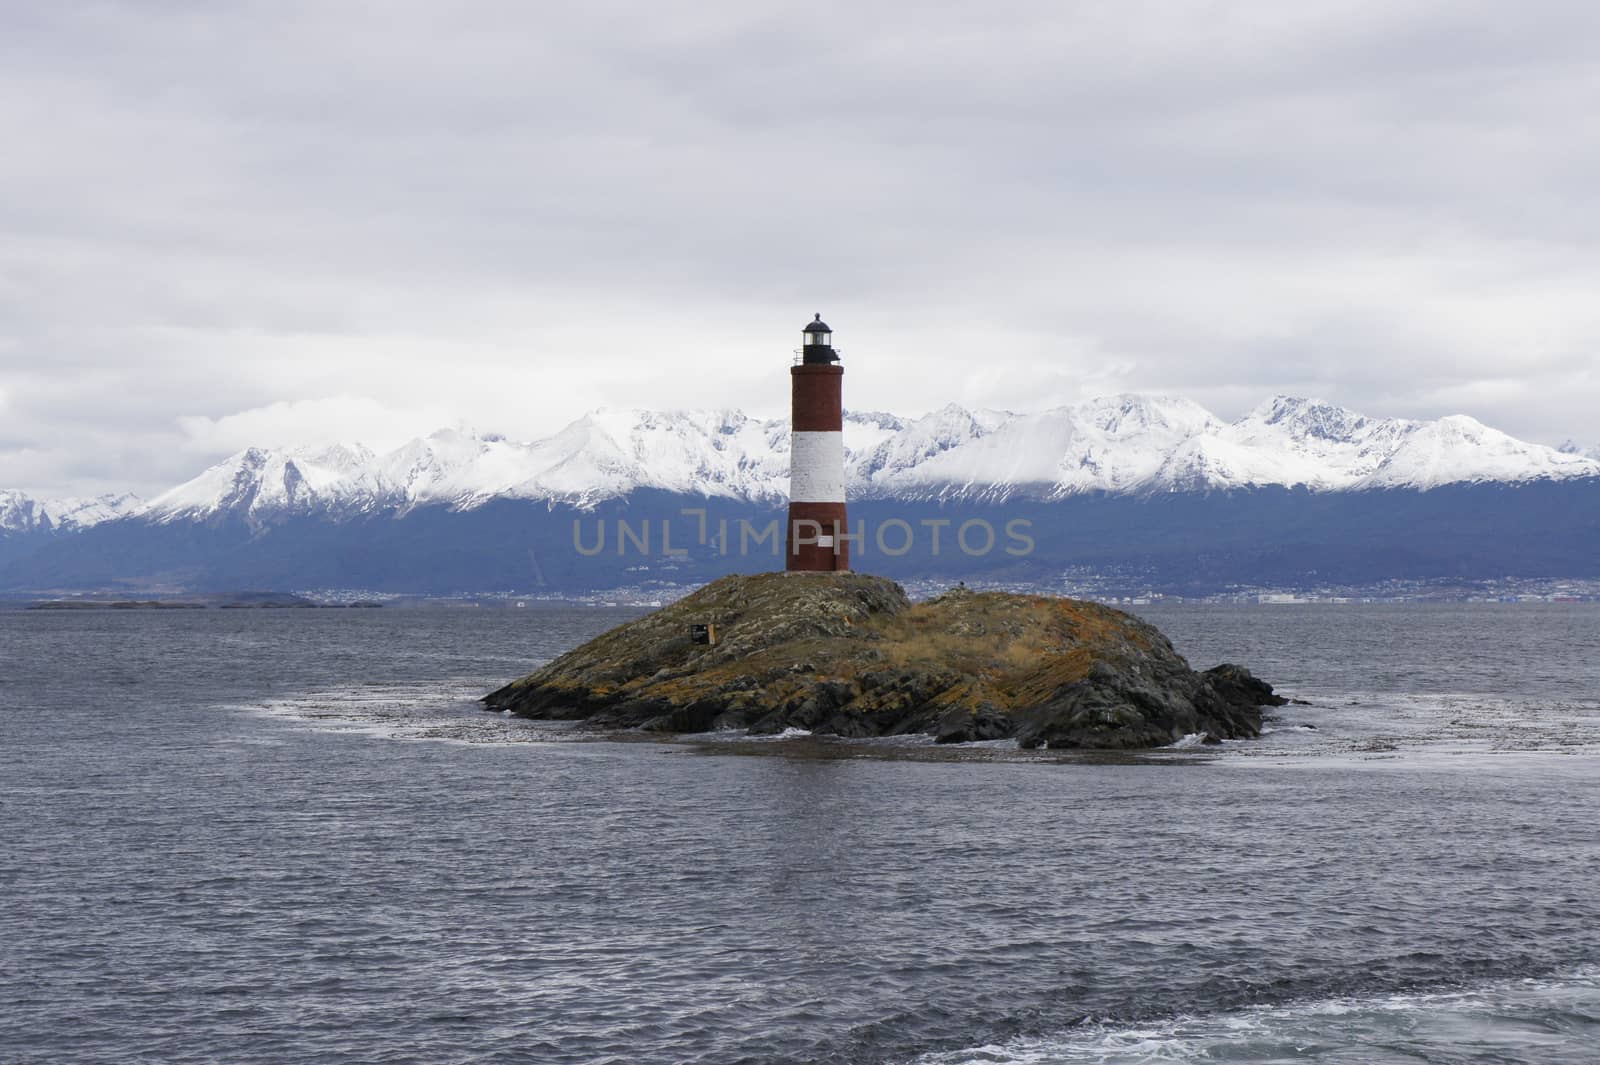 The Lighthouse at the End of the World. Far away we can see Ushuaia